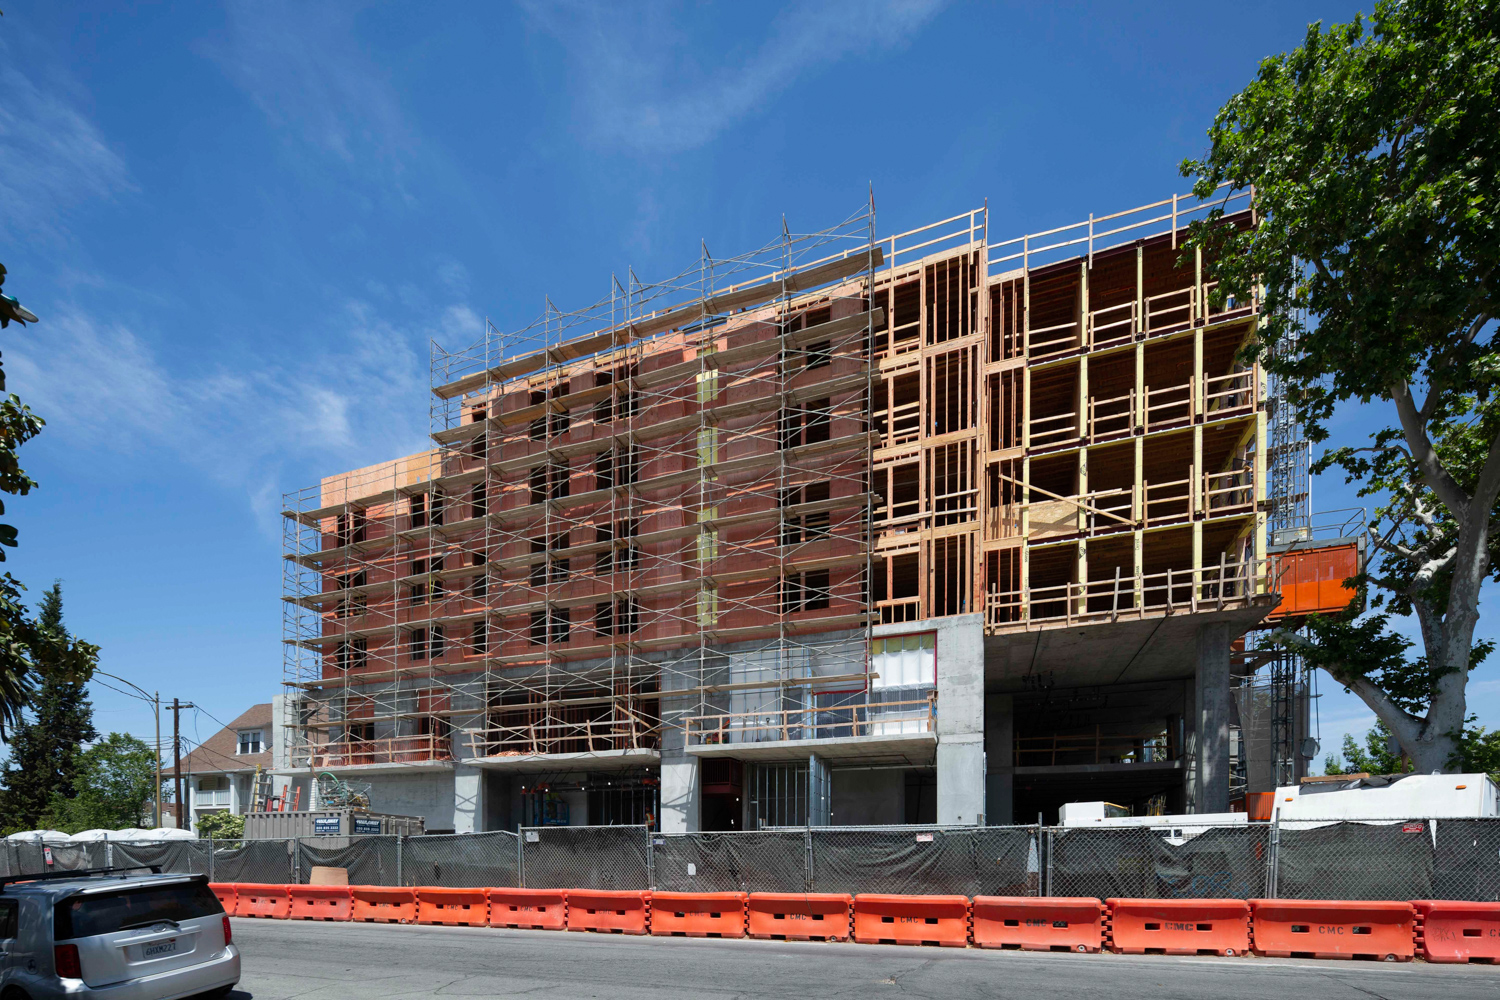 525 East Santa Clara Street construction update, image by Andrew Campbell Nelson